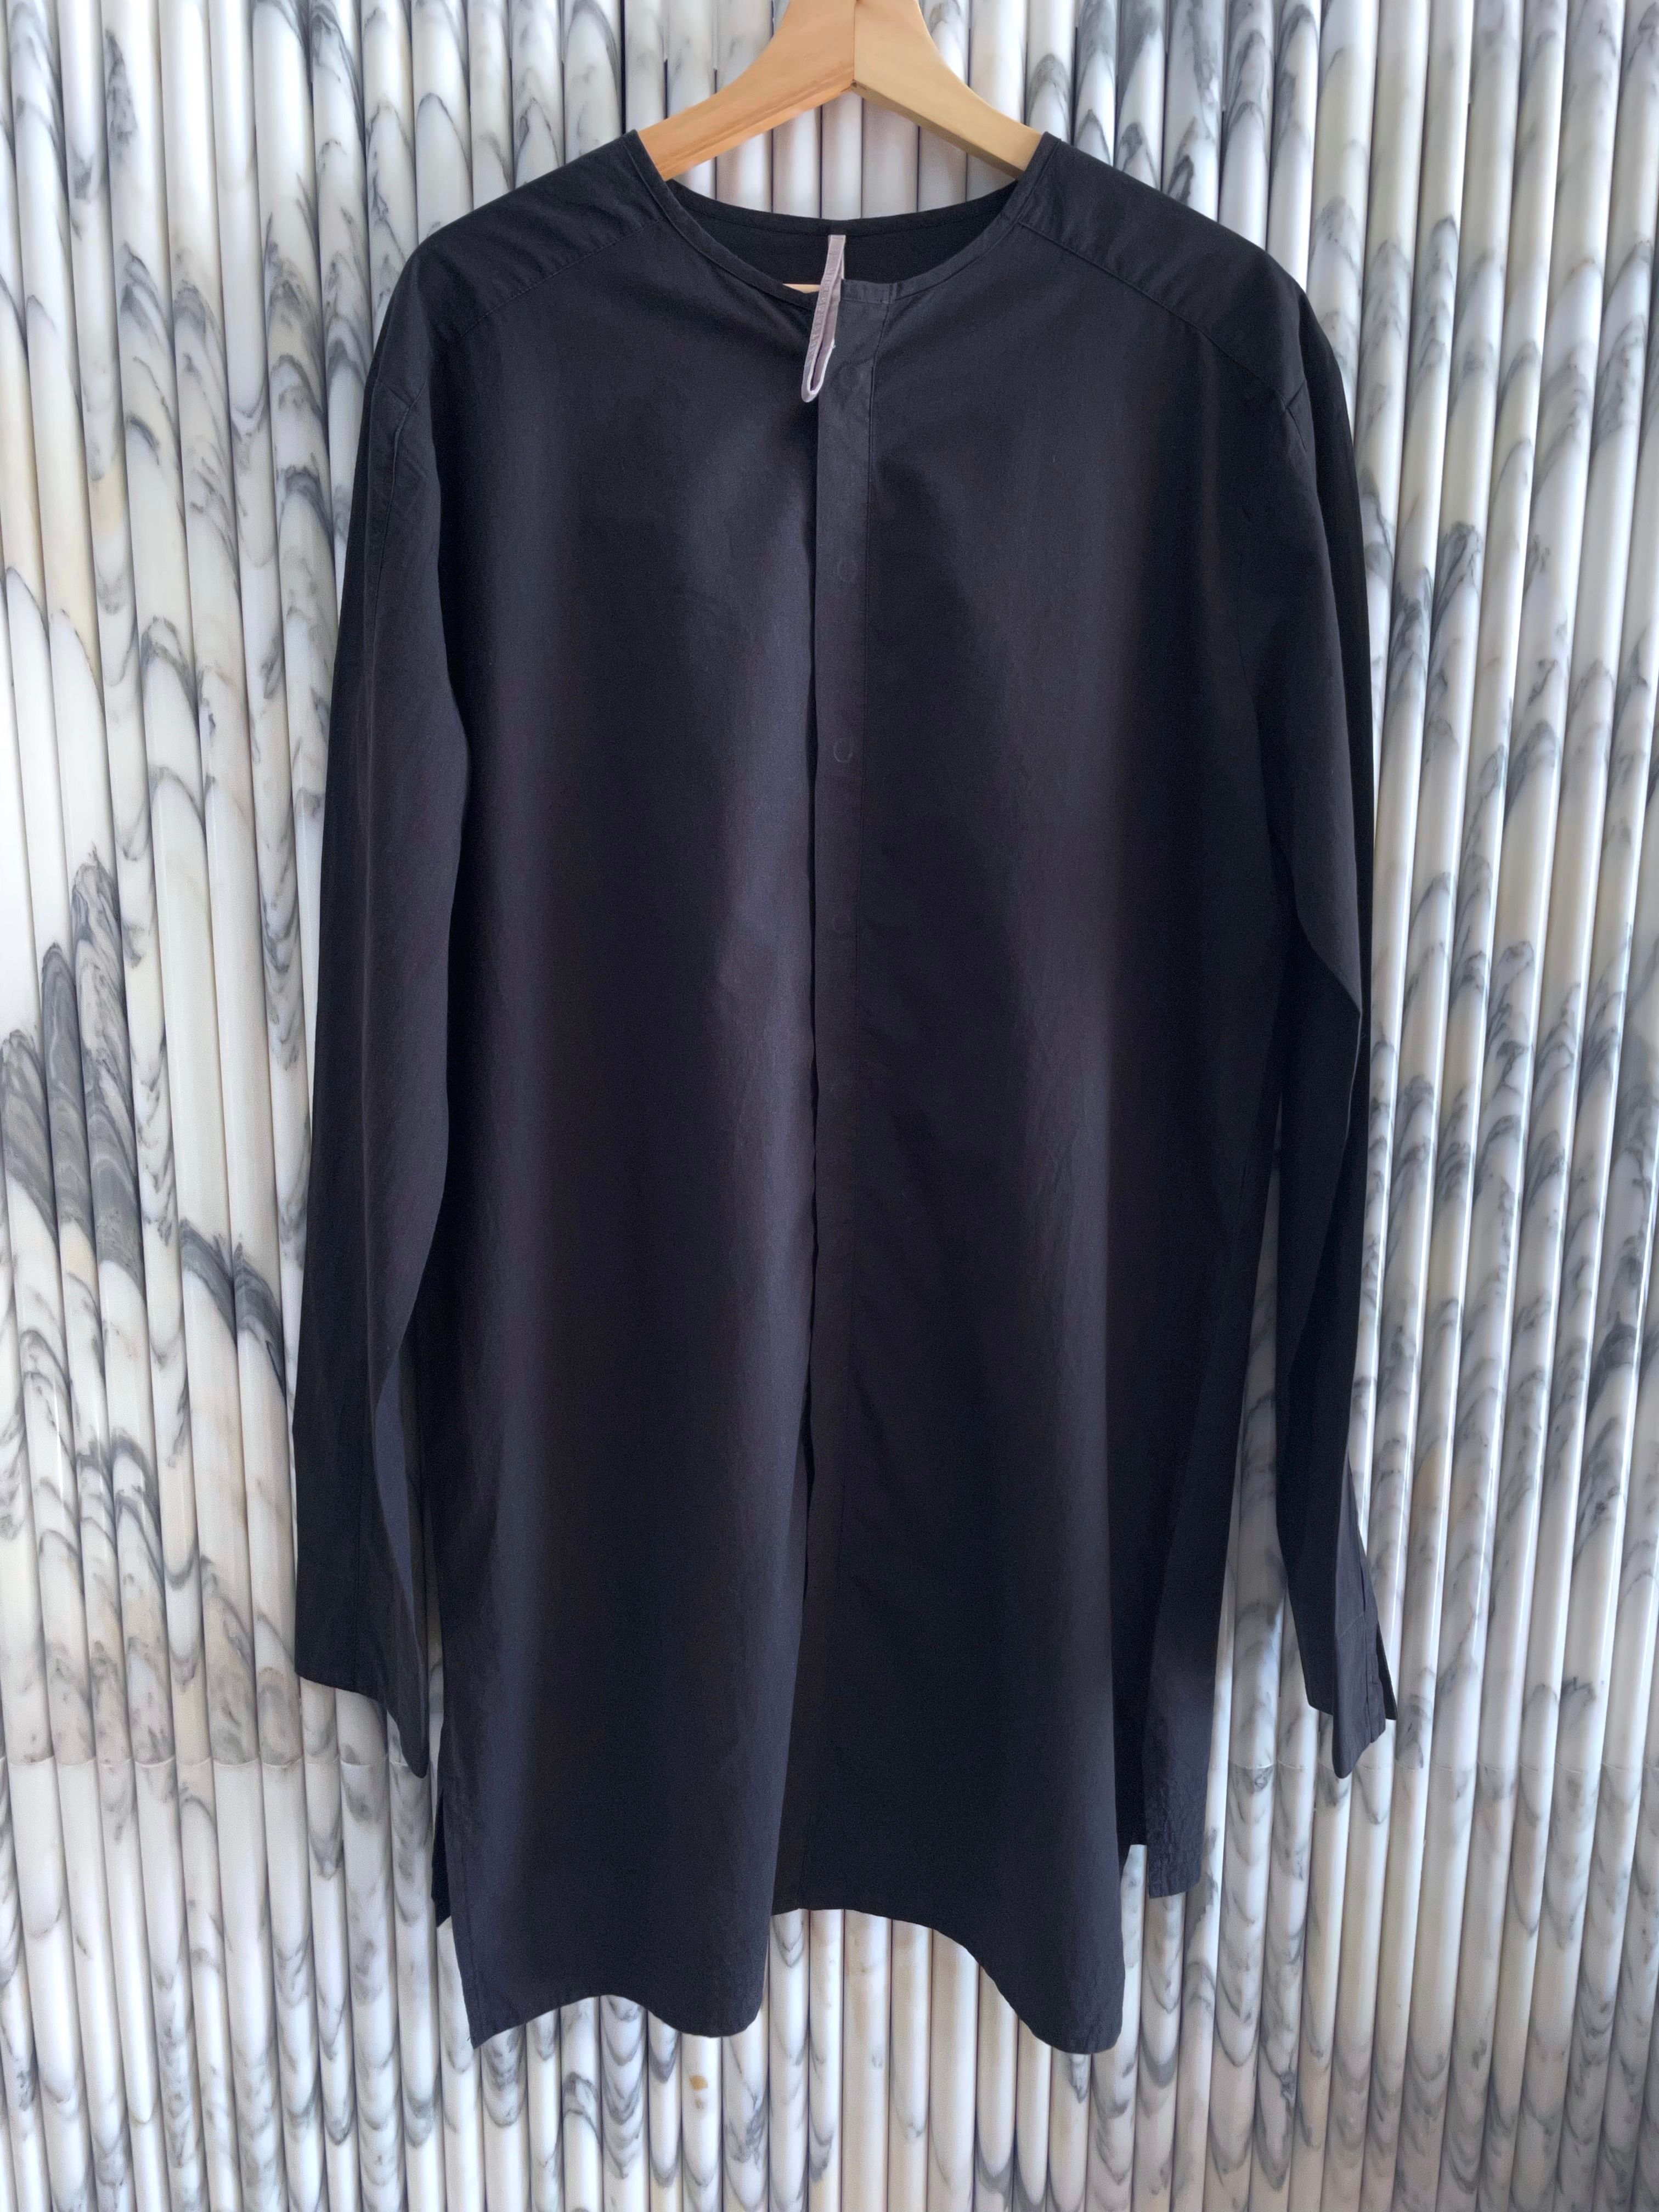 Pre-owned Damir Doma X Silent By Damir Doma Collarless Elongated Cotton Tunic Shirt In Black